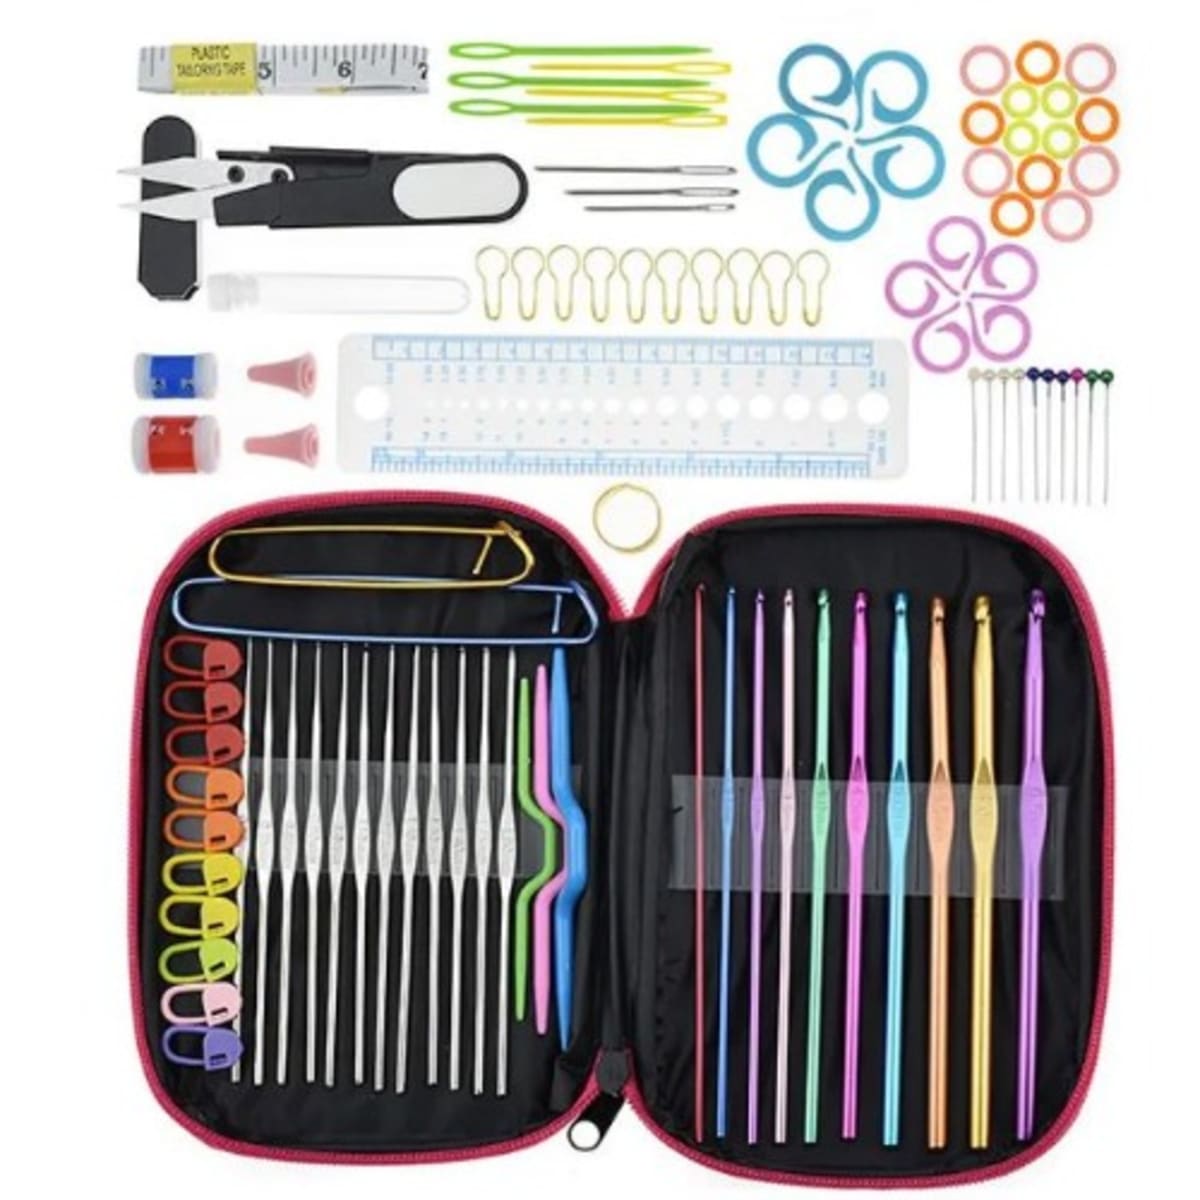 Crochet Needles & Safety Pins - Sewing Collection • Raam Crochet